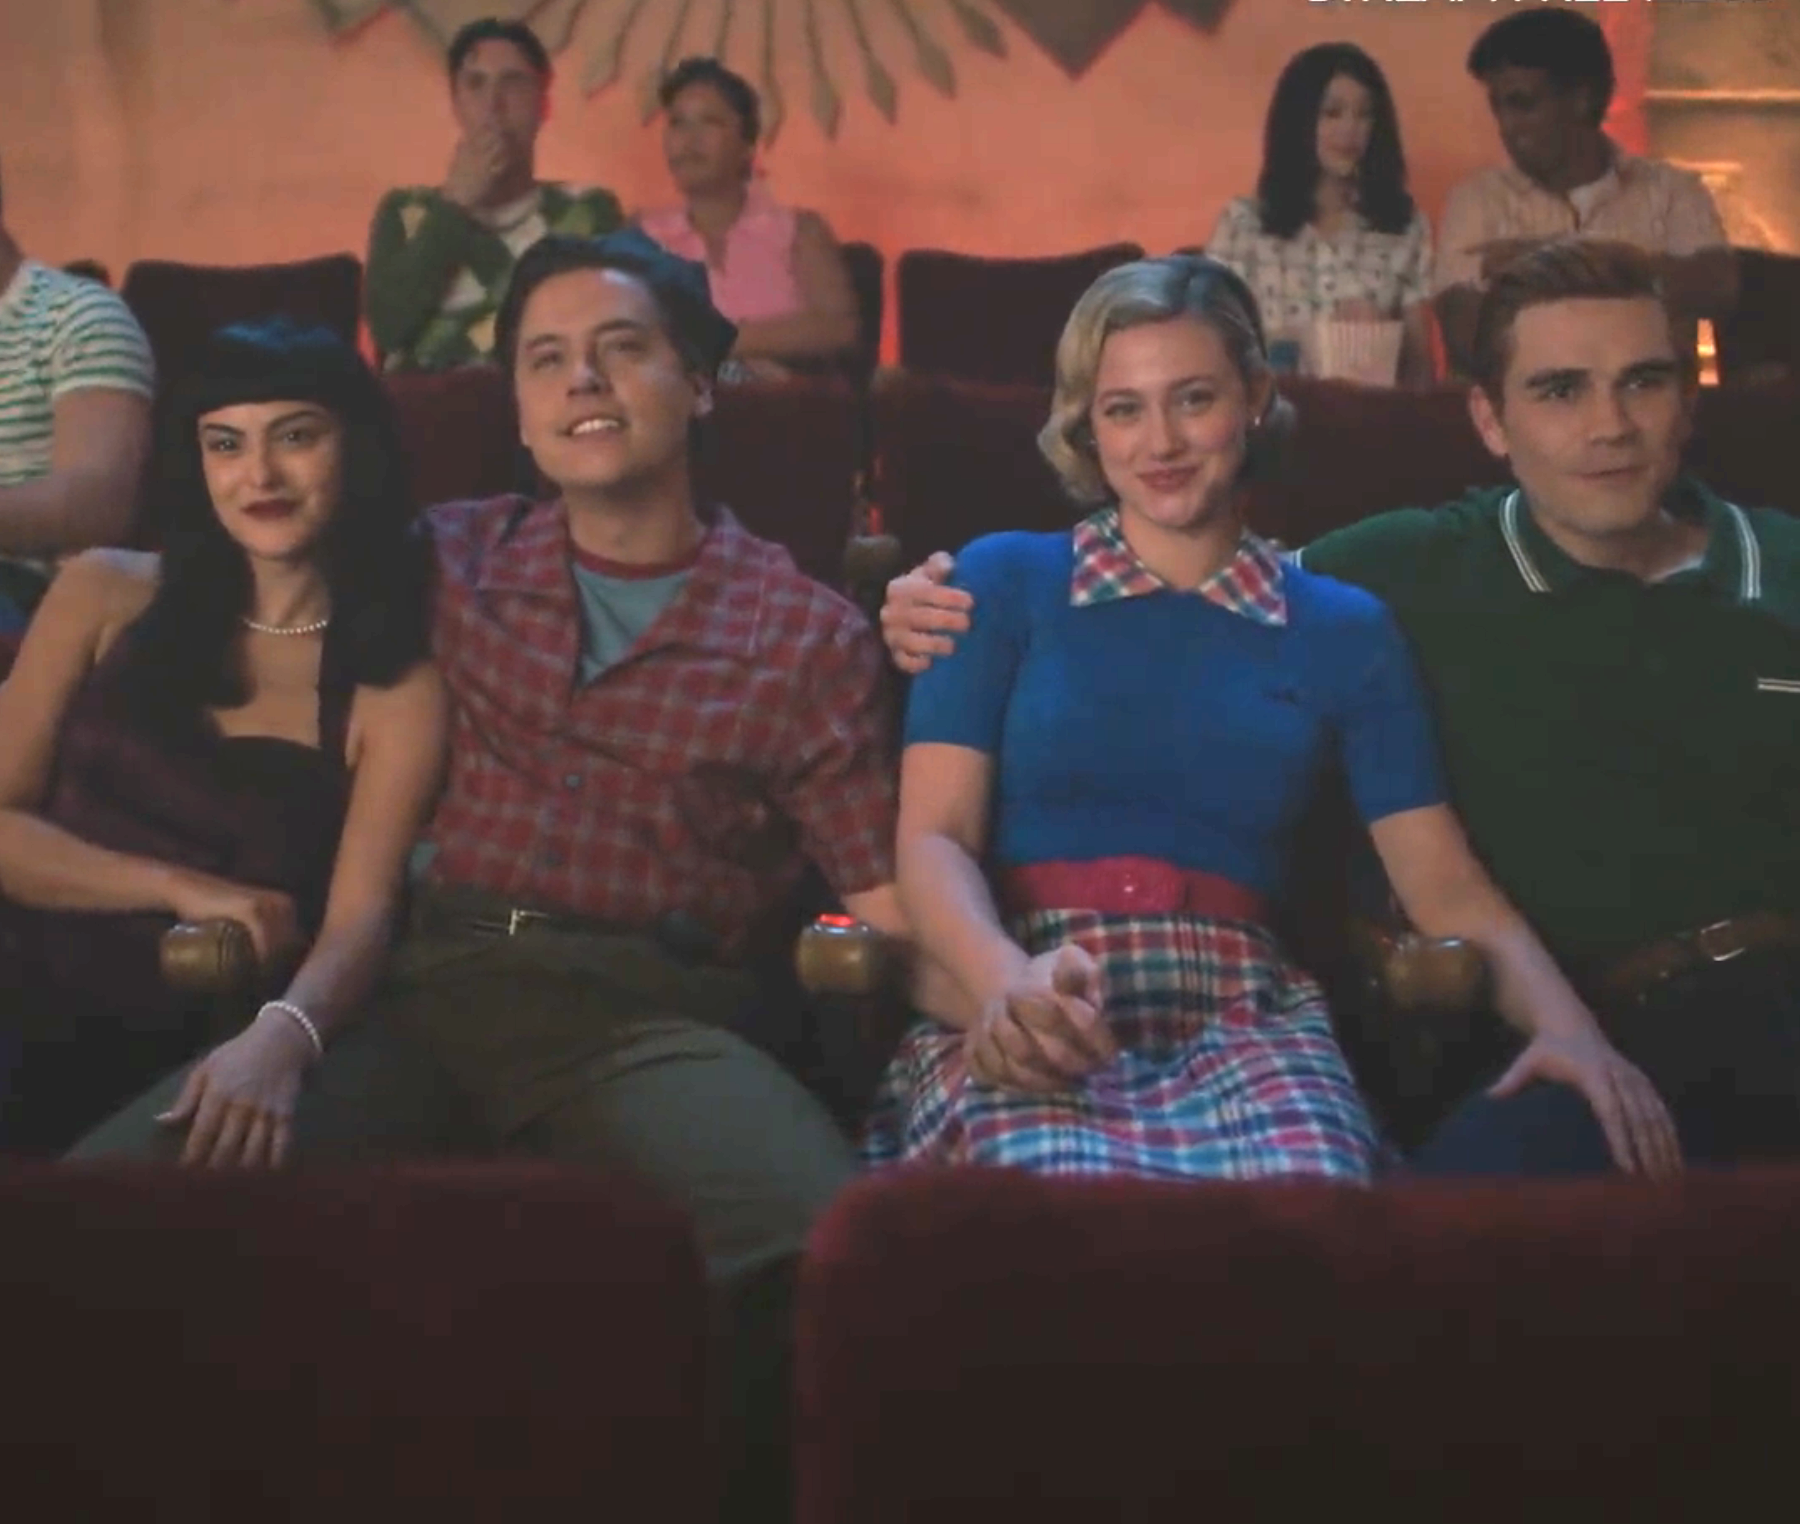 Closeup of Veronica, Jughead, Betty, and Archie sitting and all holding hands